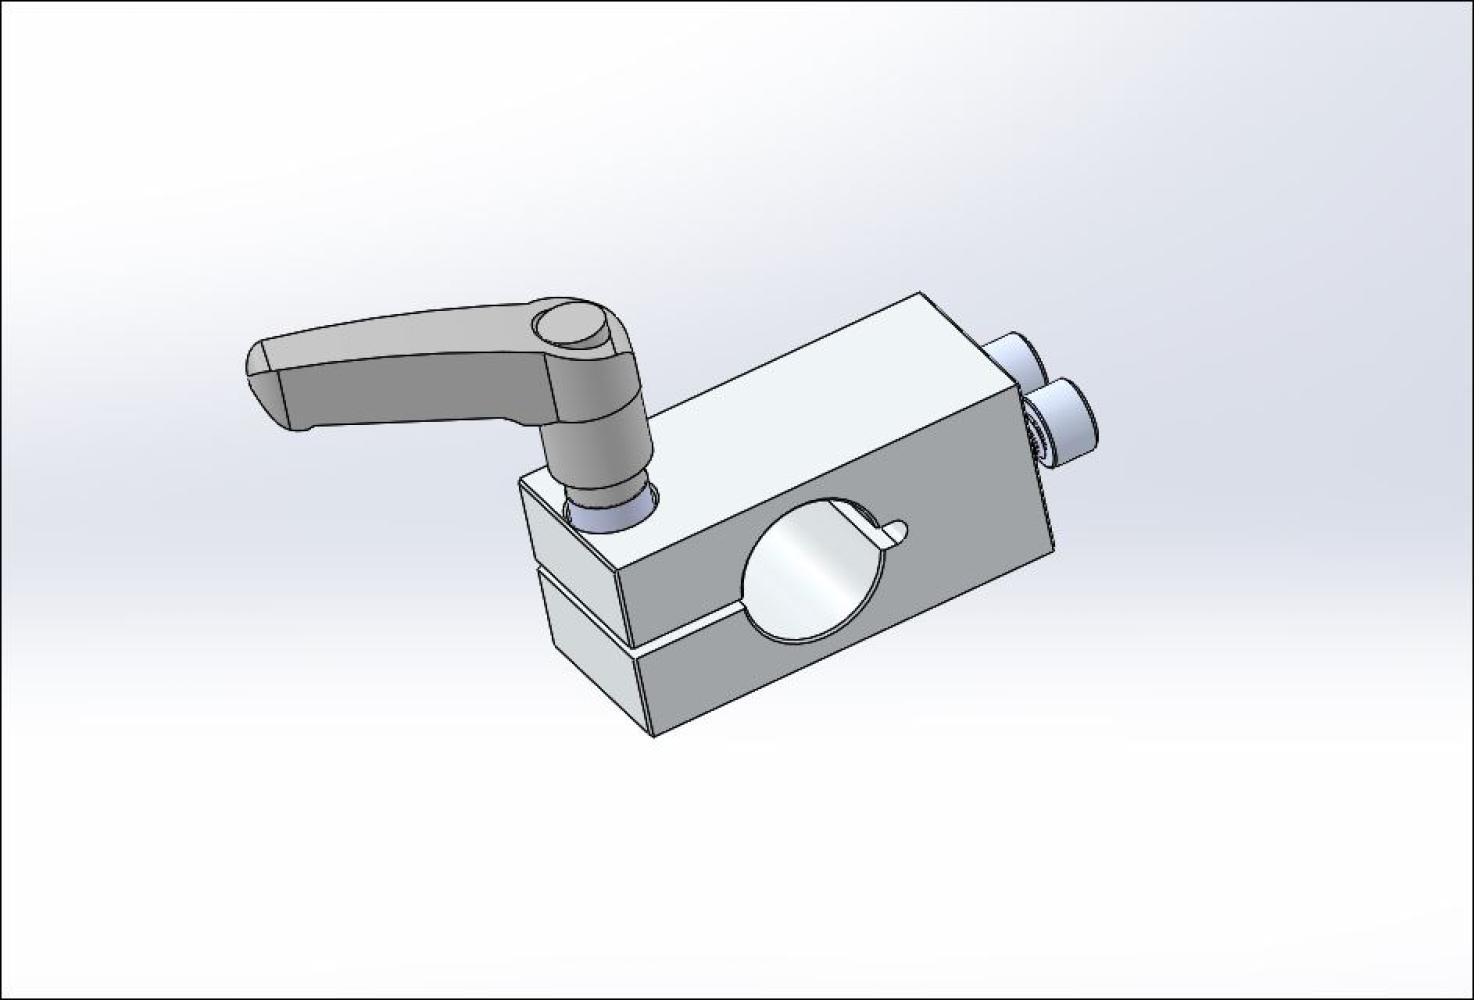 AL End Knuckle w/key and handle for 1/2